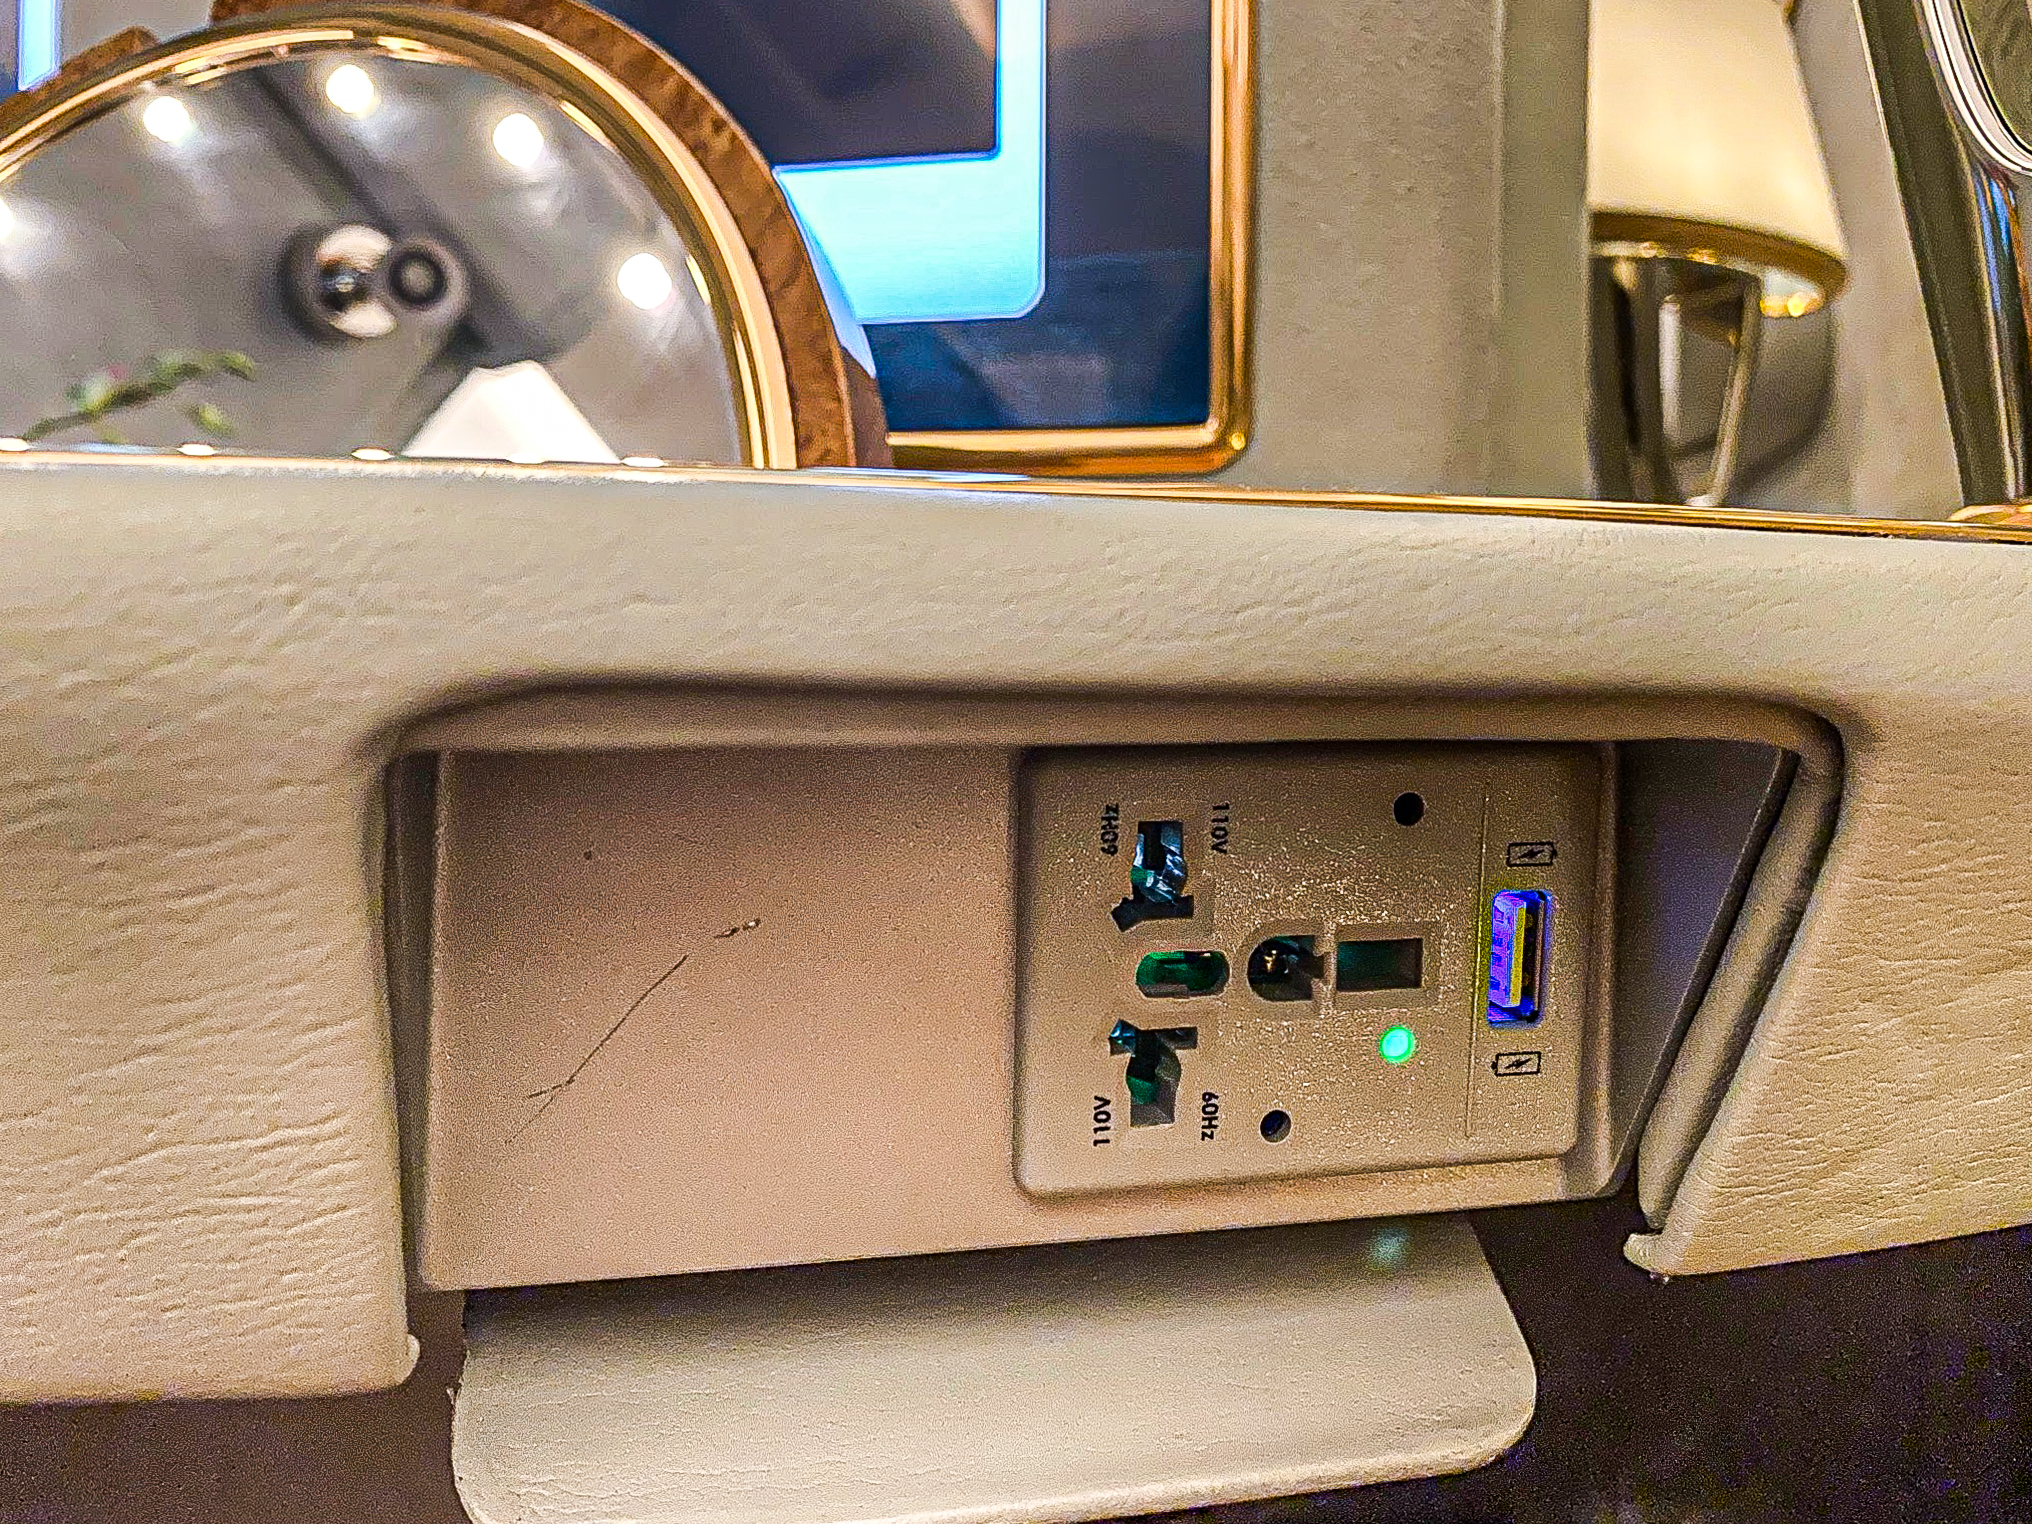 Emirates 777 First Class Universal Power Outlet